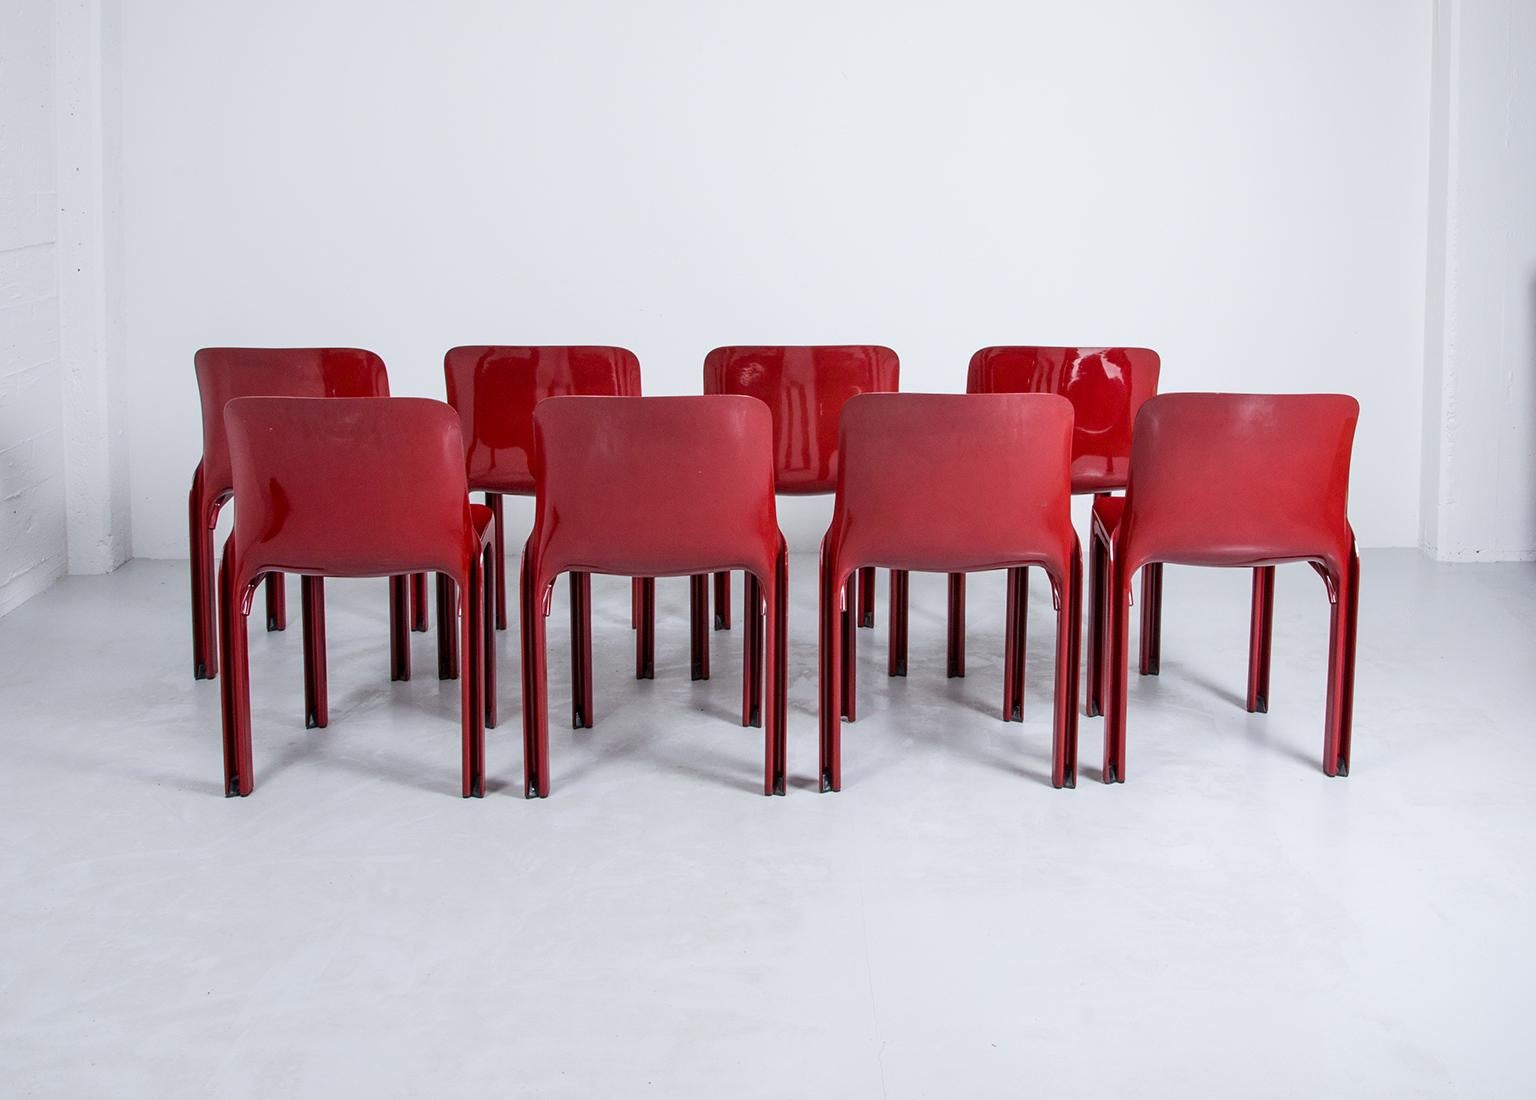 Italian Selene Stacking Chairs by Vico Magistretti for Artemide in Dark Red